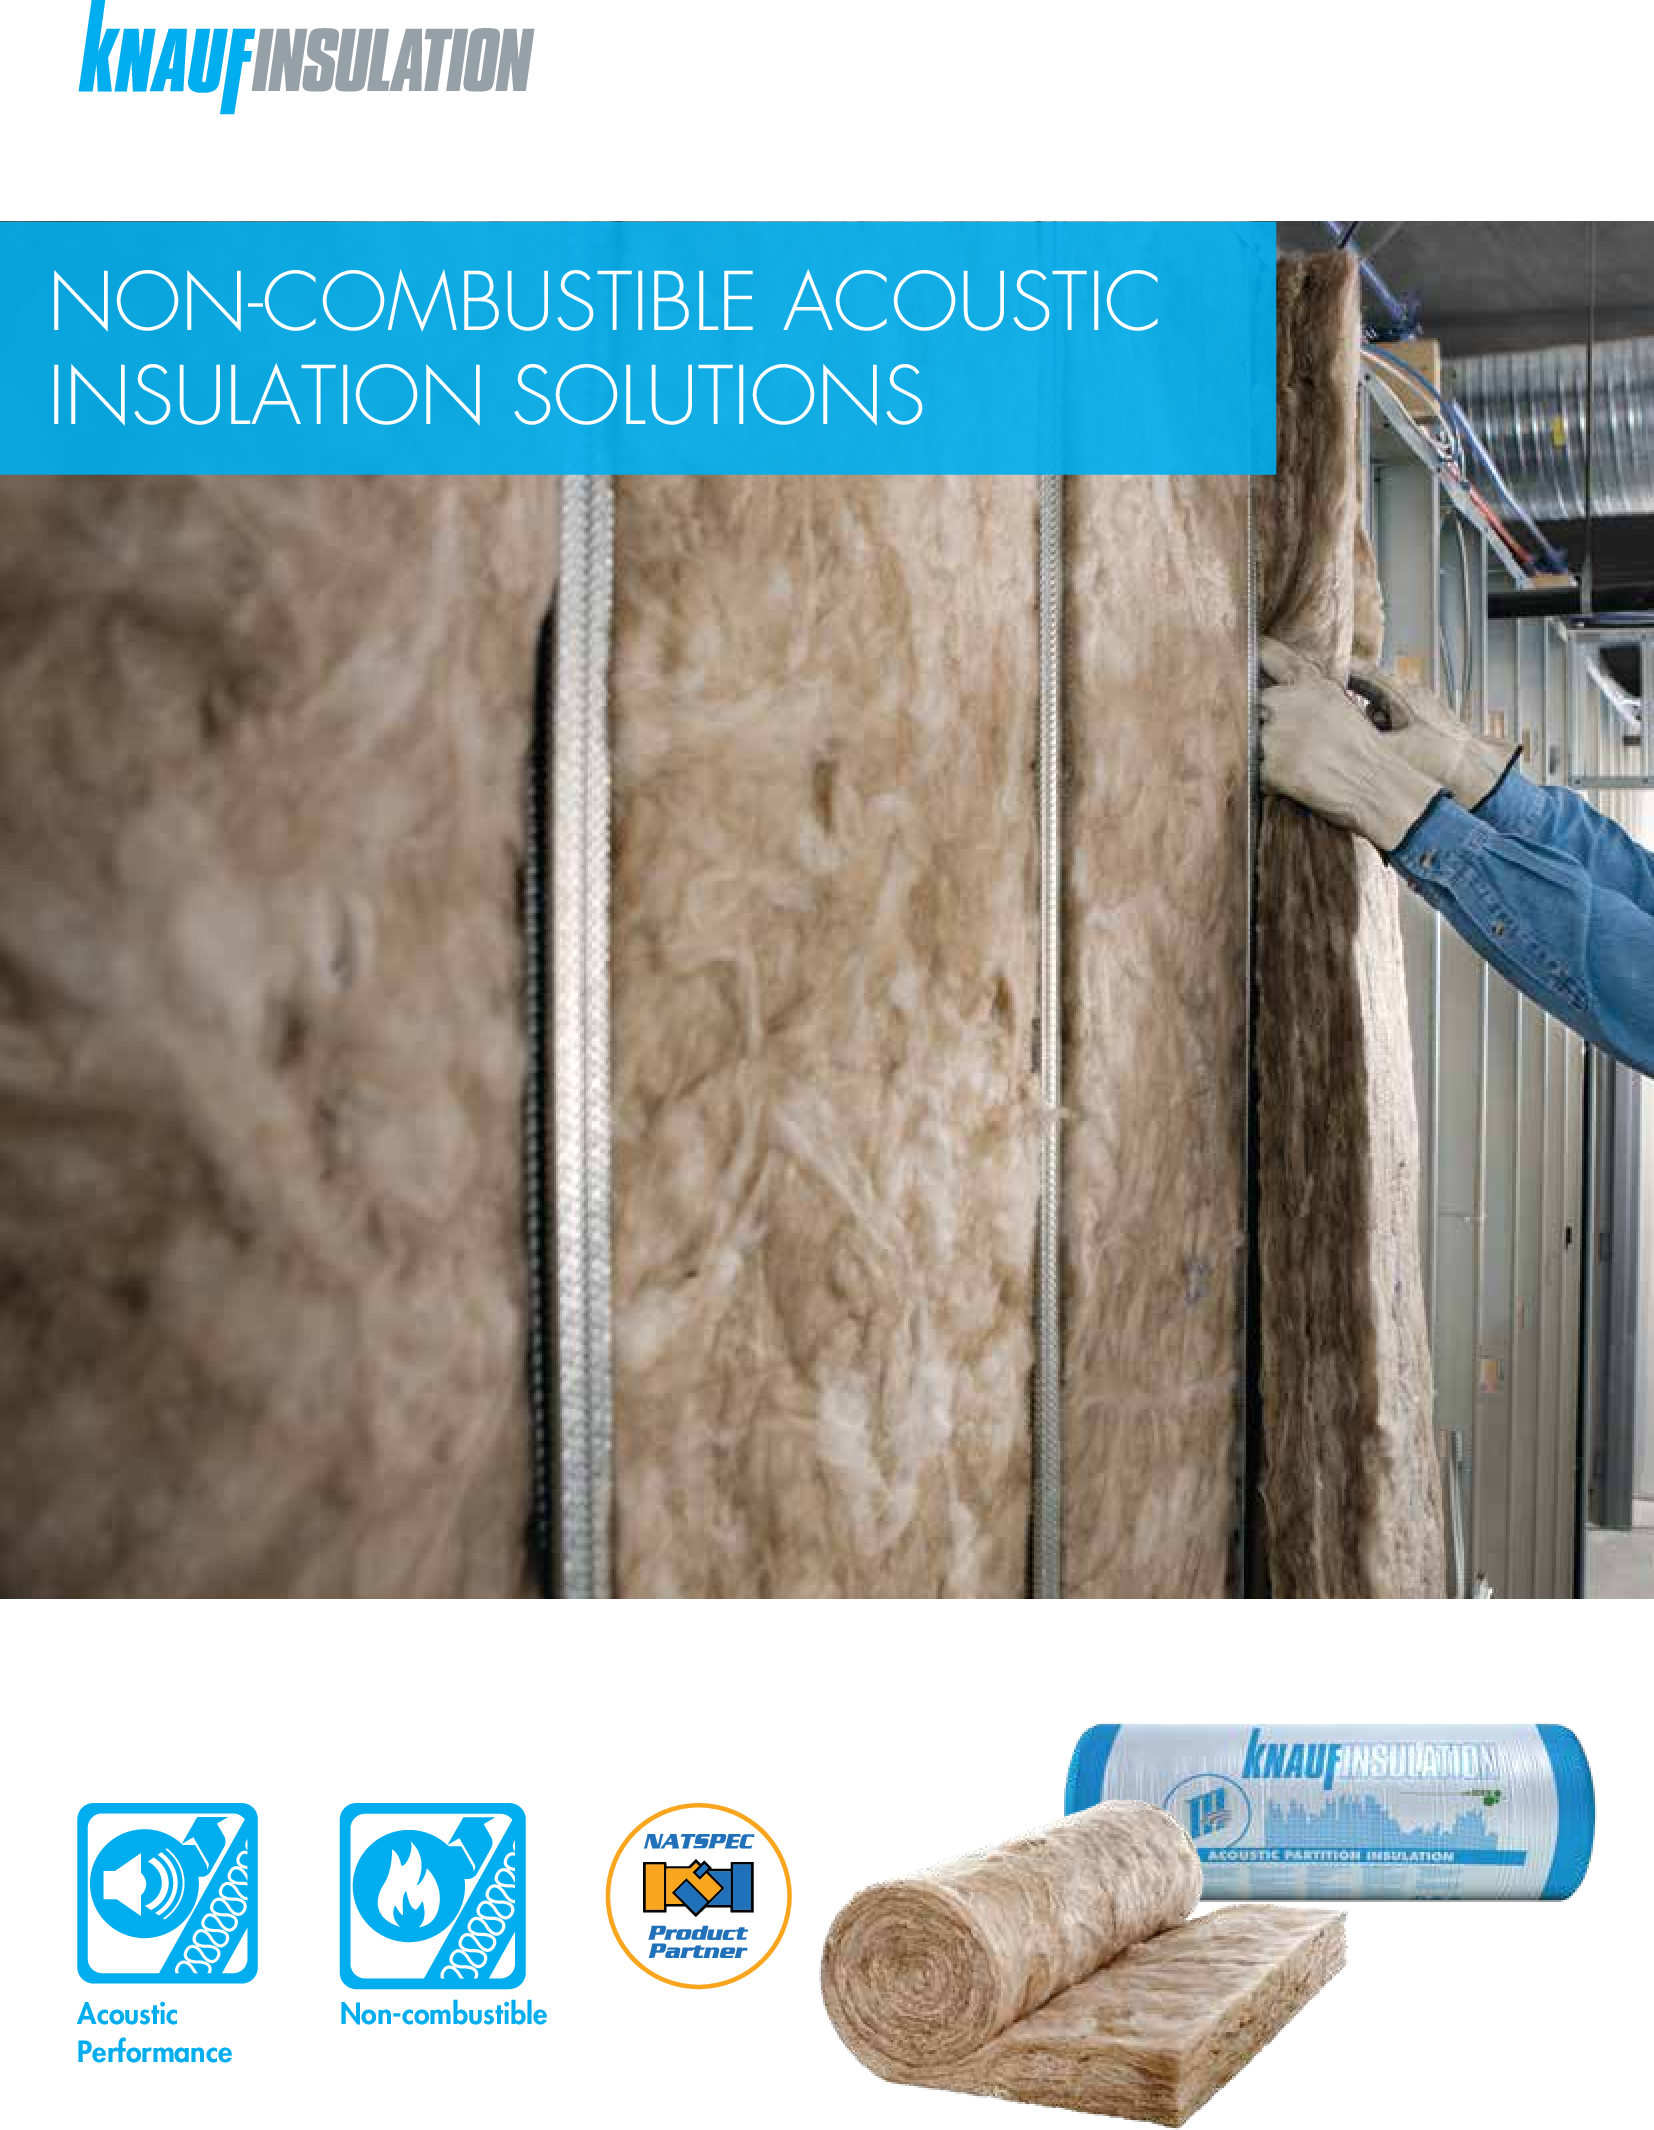 Non-combustible Acoustic Insulation Solutions